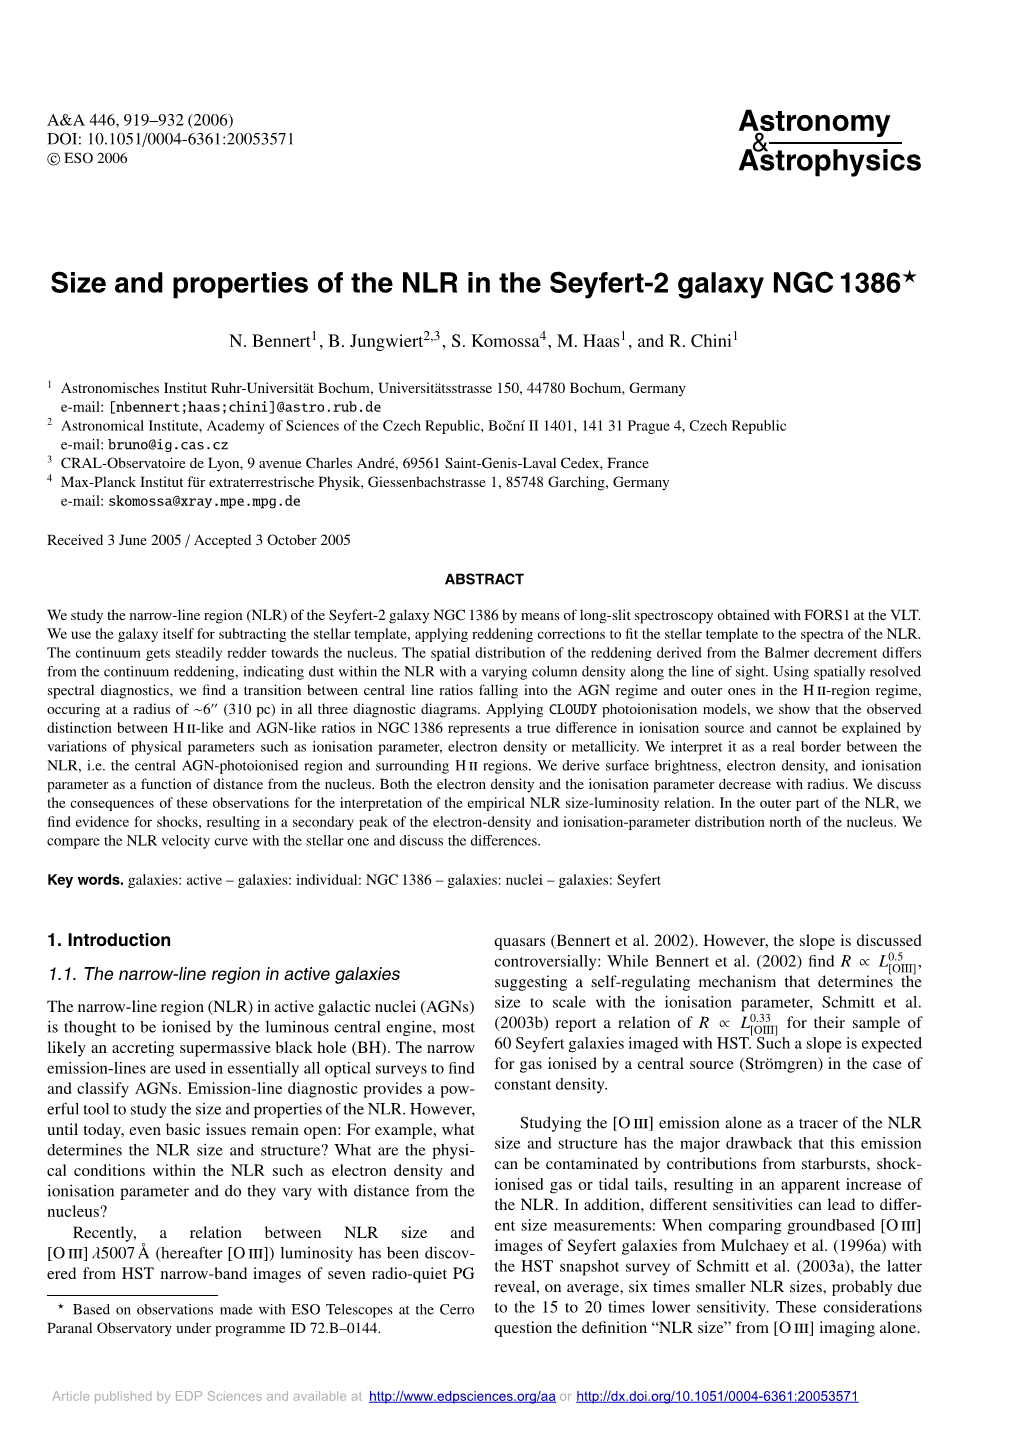 Size and Properties of the NLR in the Seyfert-2 Galaxy NGC 1386